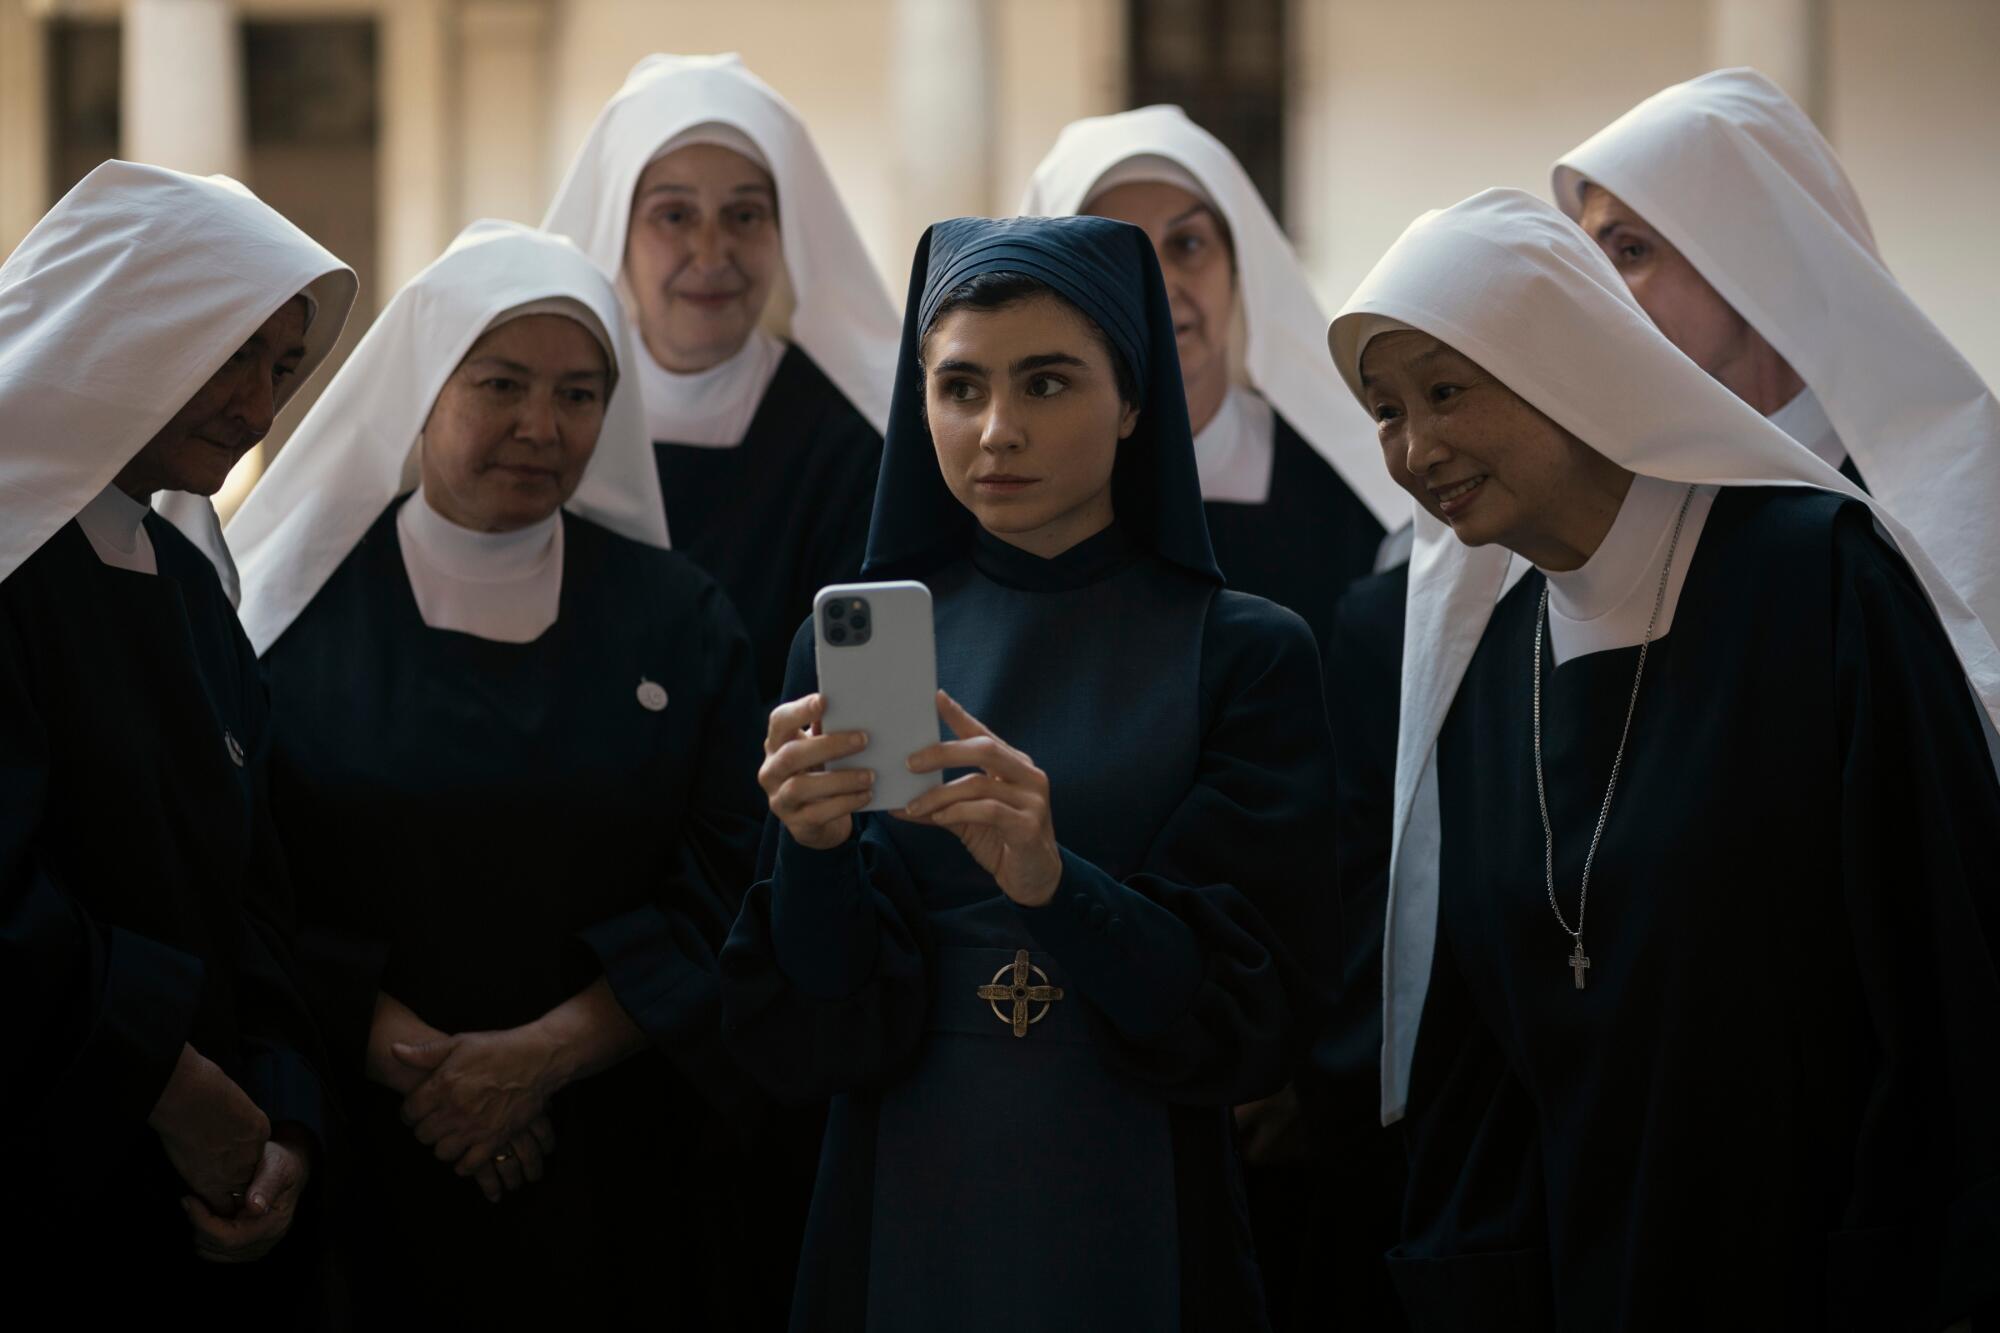 A sister holding a smartphone surrounded by a group of nuns in white habits